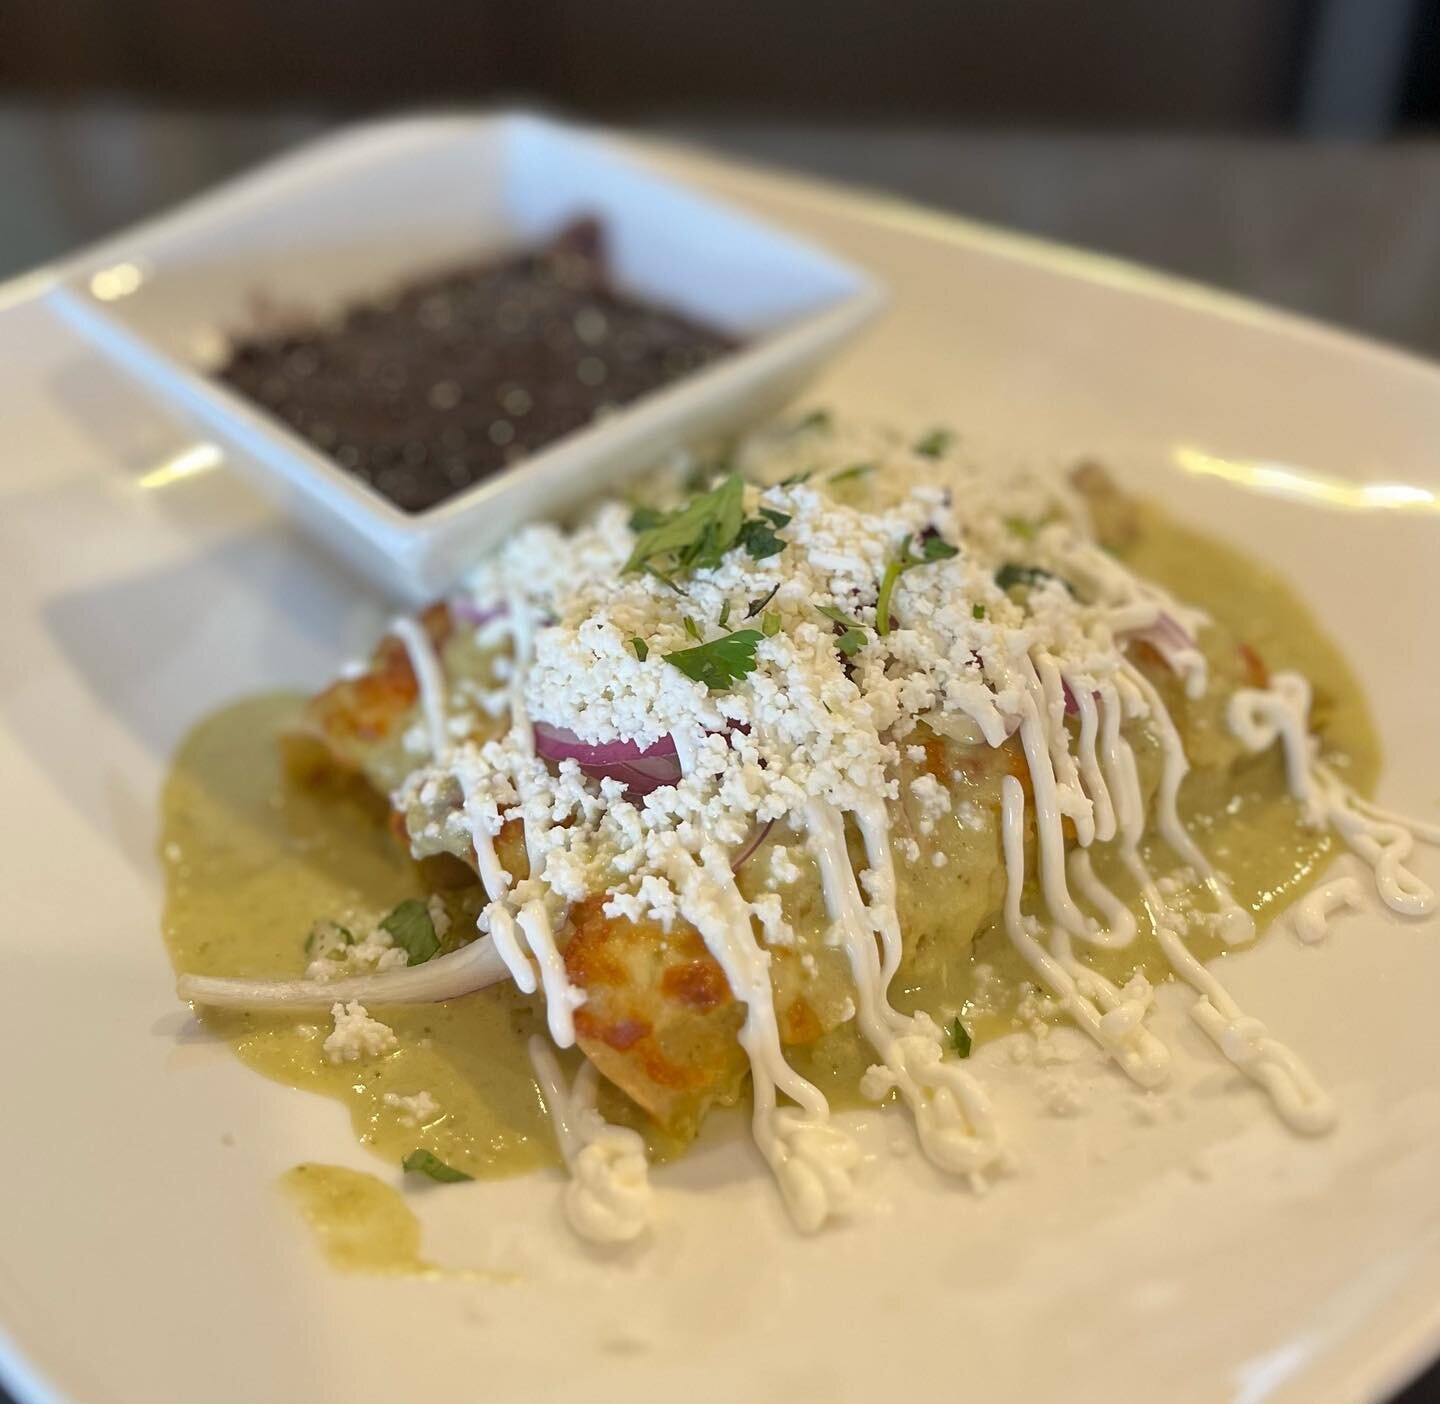 Our Special This Weekend! 😋
➡️Chicken Enchiladas Verdes Suizas⬅️

Three Corn Tortillas filled with Shredded Chicken topped with Creamy Tomatillo Sauce, Queso Fresco, Sour Cream, Red Onions and Cilantro. Served with Black Beans.🔥 

#catrinacafe #sea